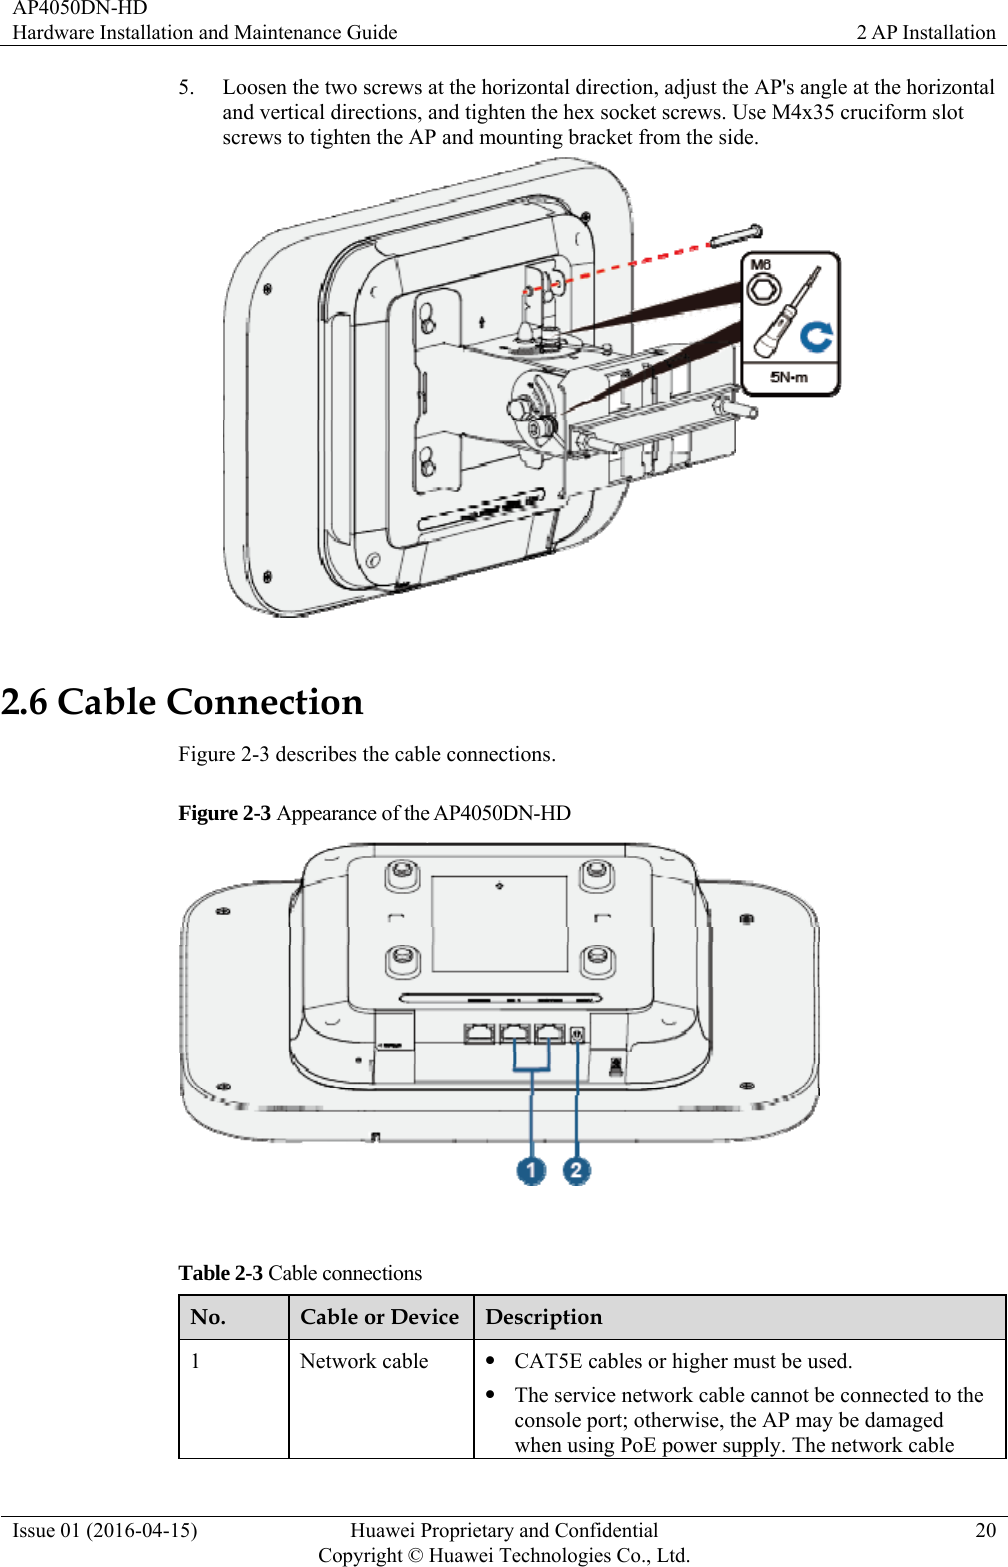 AP4050DN-HD Hardware Installation and Maintenance Guide  2 AP Installation Issue 01 (2016-04-15)  Huawei Proprietary and Confidential         Copyright © Huawei Technologies Co., Ltd.20 5. Loosen the two screws at the horizontal direction, adjust the AP&apos;s angle at the horizontal and vertical directions, and tighten the hex socket screws. Use M4x35 cruciform slot screws to tighten the AP and mounting bracket from the side.  2.6 Cable Connection Figure 2-3 describes the cable connections. Figure 2-3 Appearance of the AP4050DN-HD   Table 2-3 Cable connections No.  Cable or Device Description 1 Network cable  CAT5E cables or higher must be used.  The service network cable cannot be connected to the console port; otherwise, the AP may be damaged when using PoE power supply. The network cable 